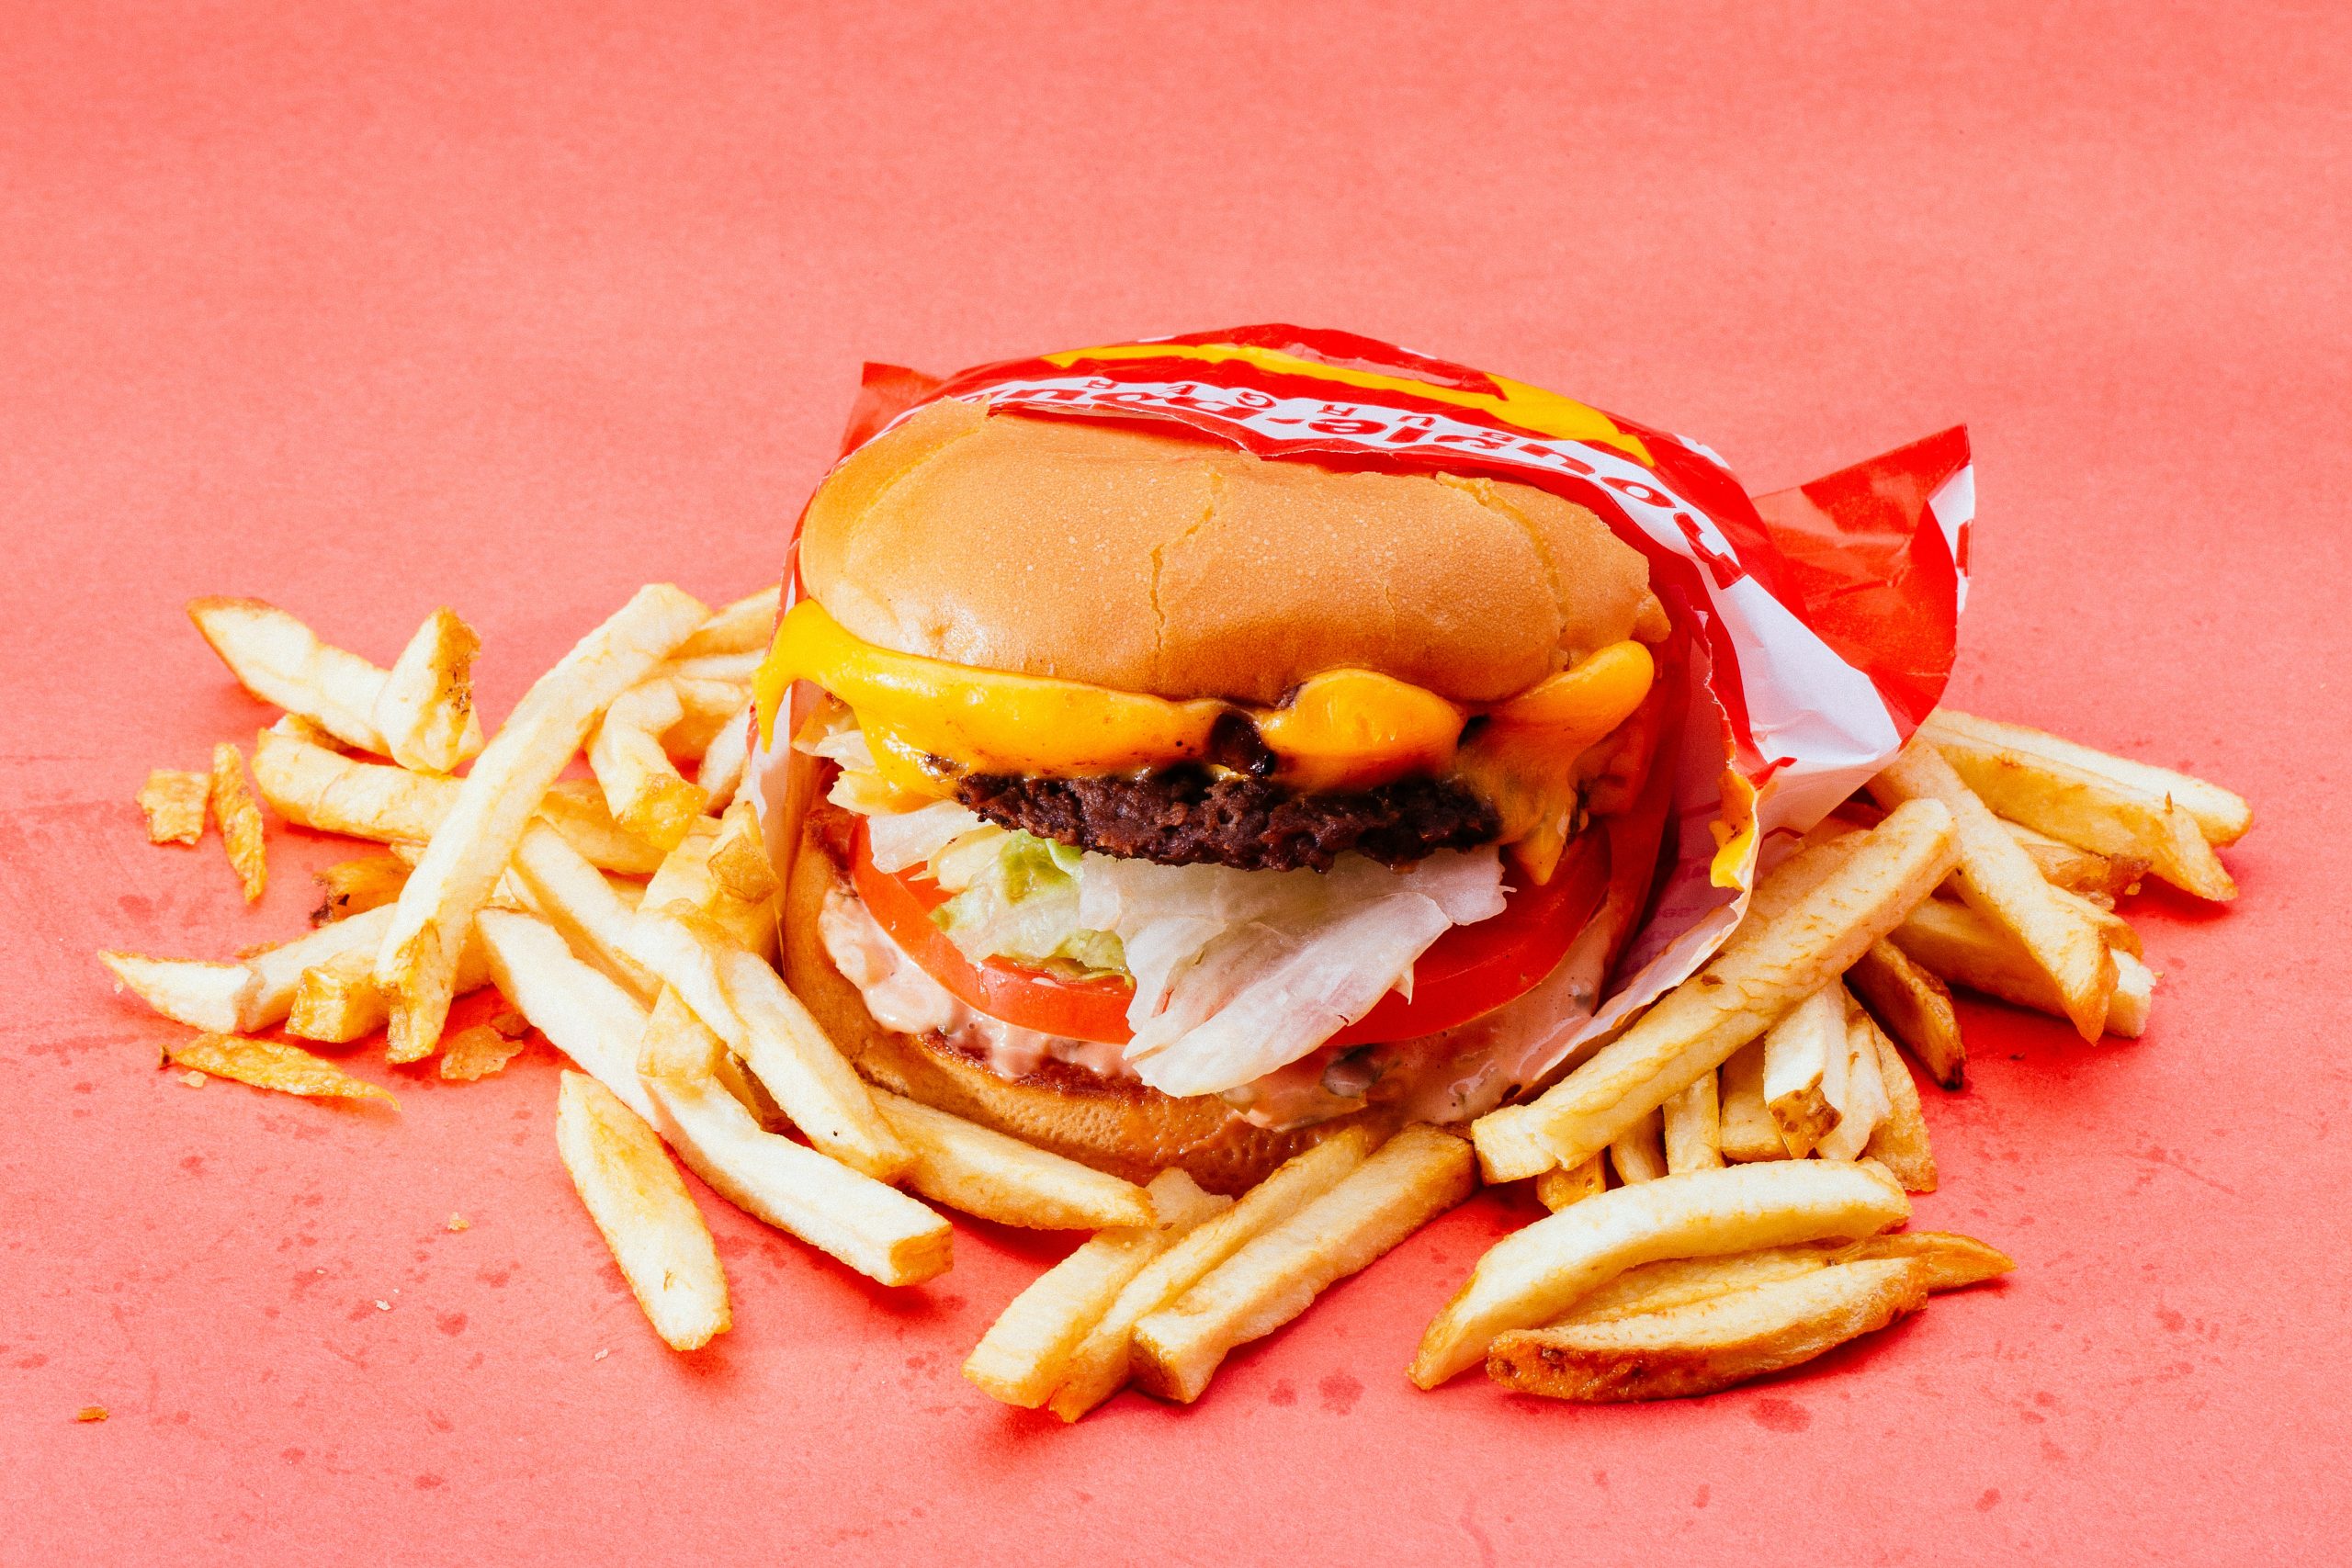 Processed Foods: How bad are they really?